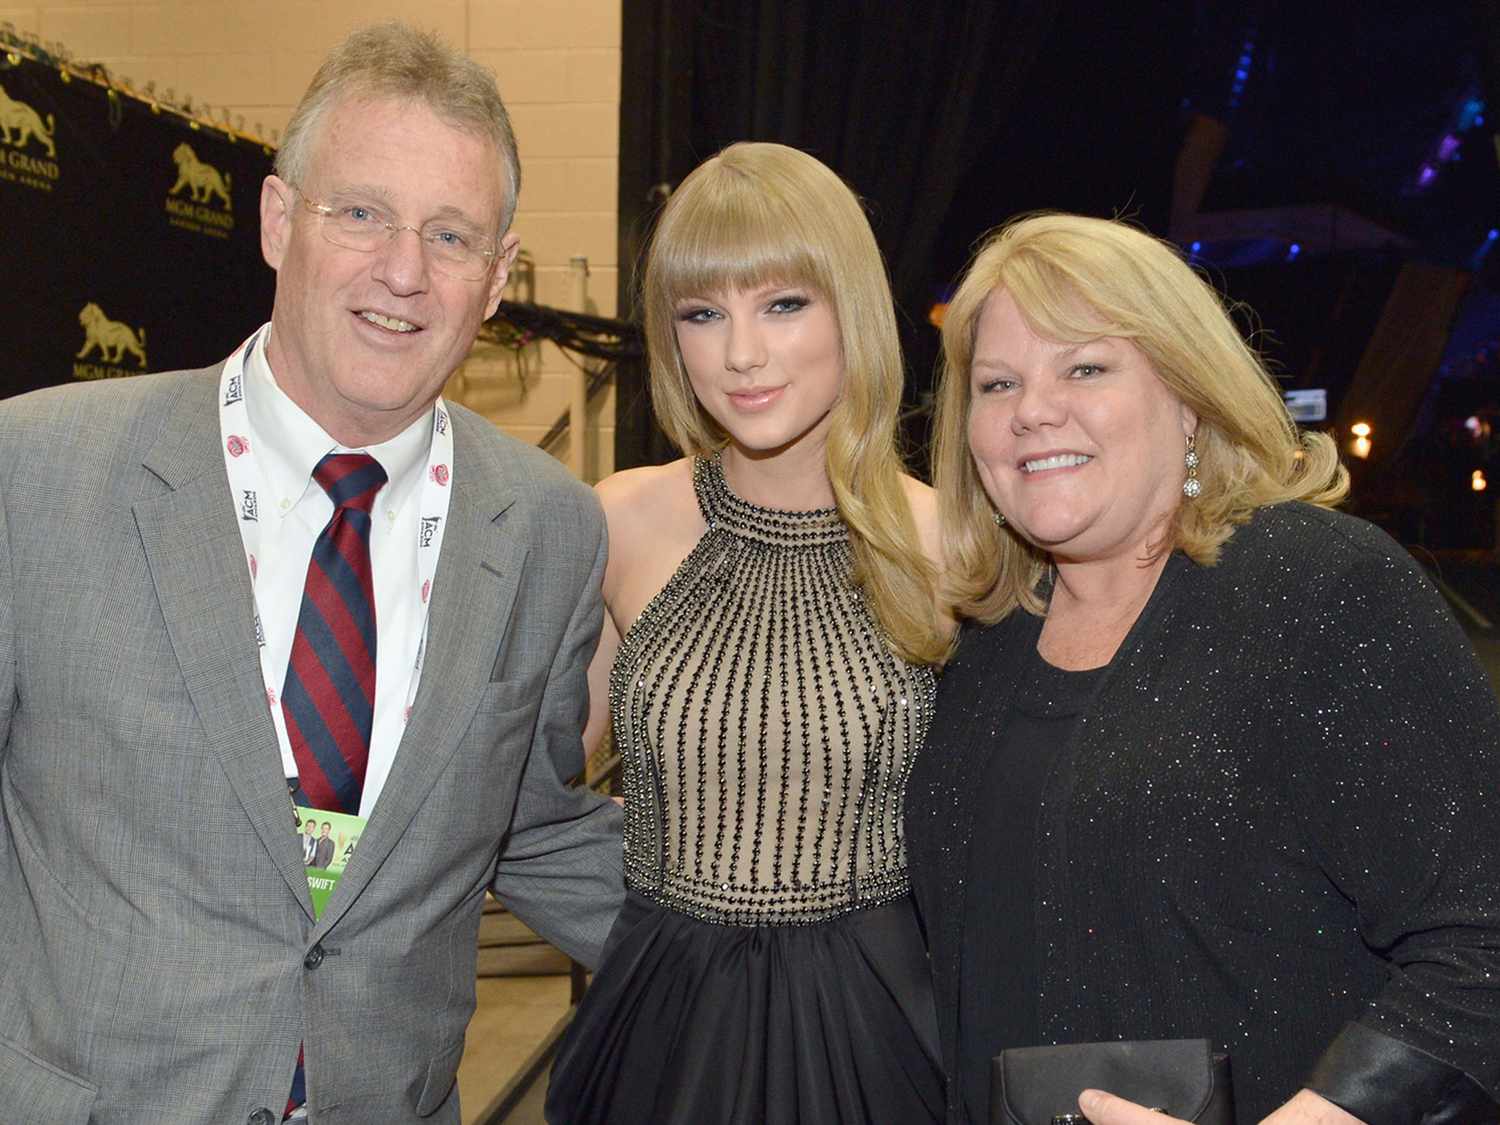 Taylor Swift parents has revealed that while the daughter [Taylor] was 'trying to keep it together,' it was obvious to  that she has already 'falling' hard for her new beau. Travis Kelce 